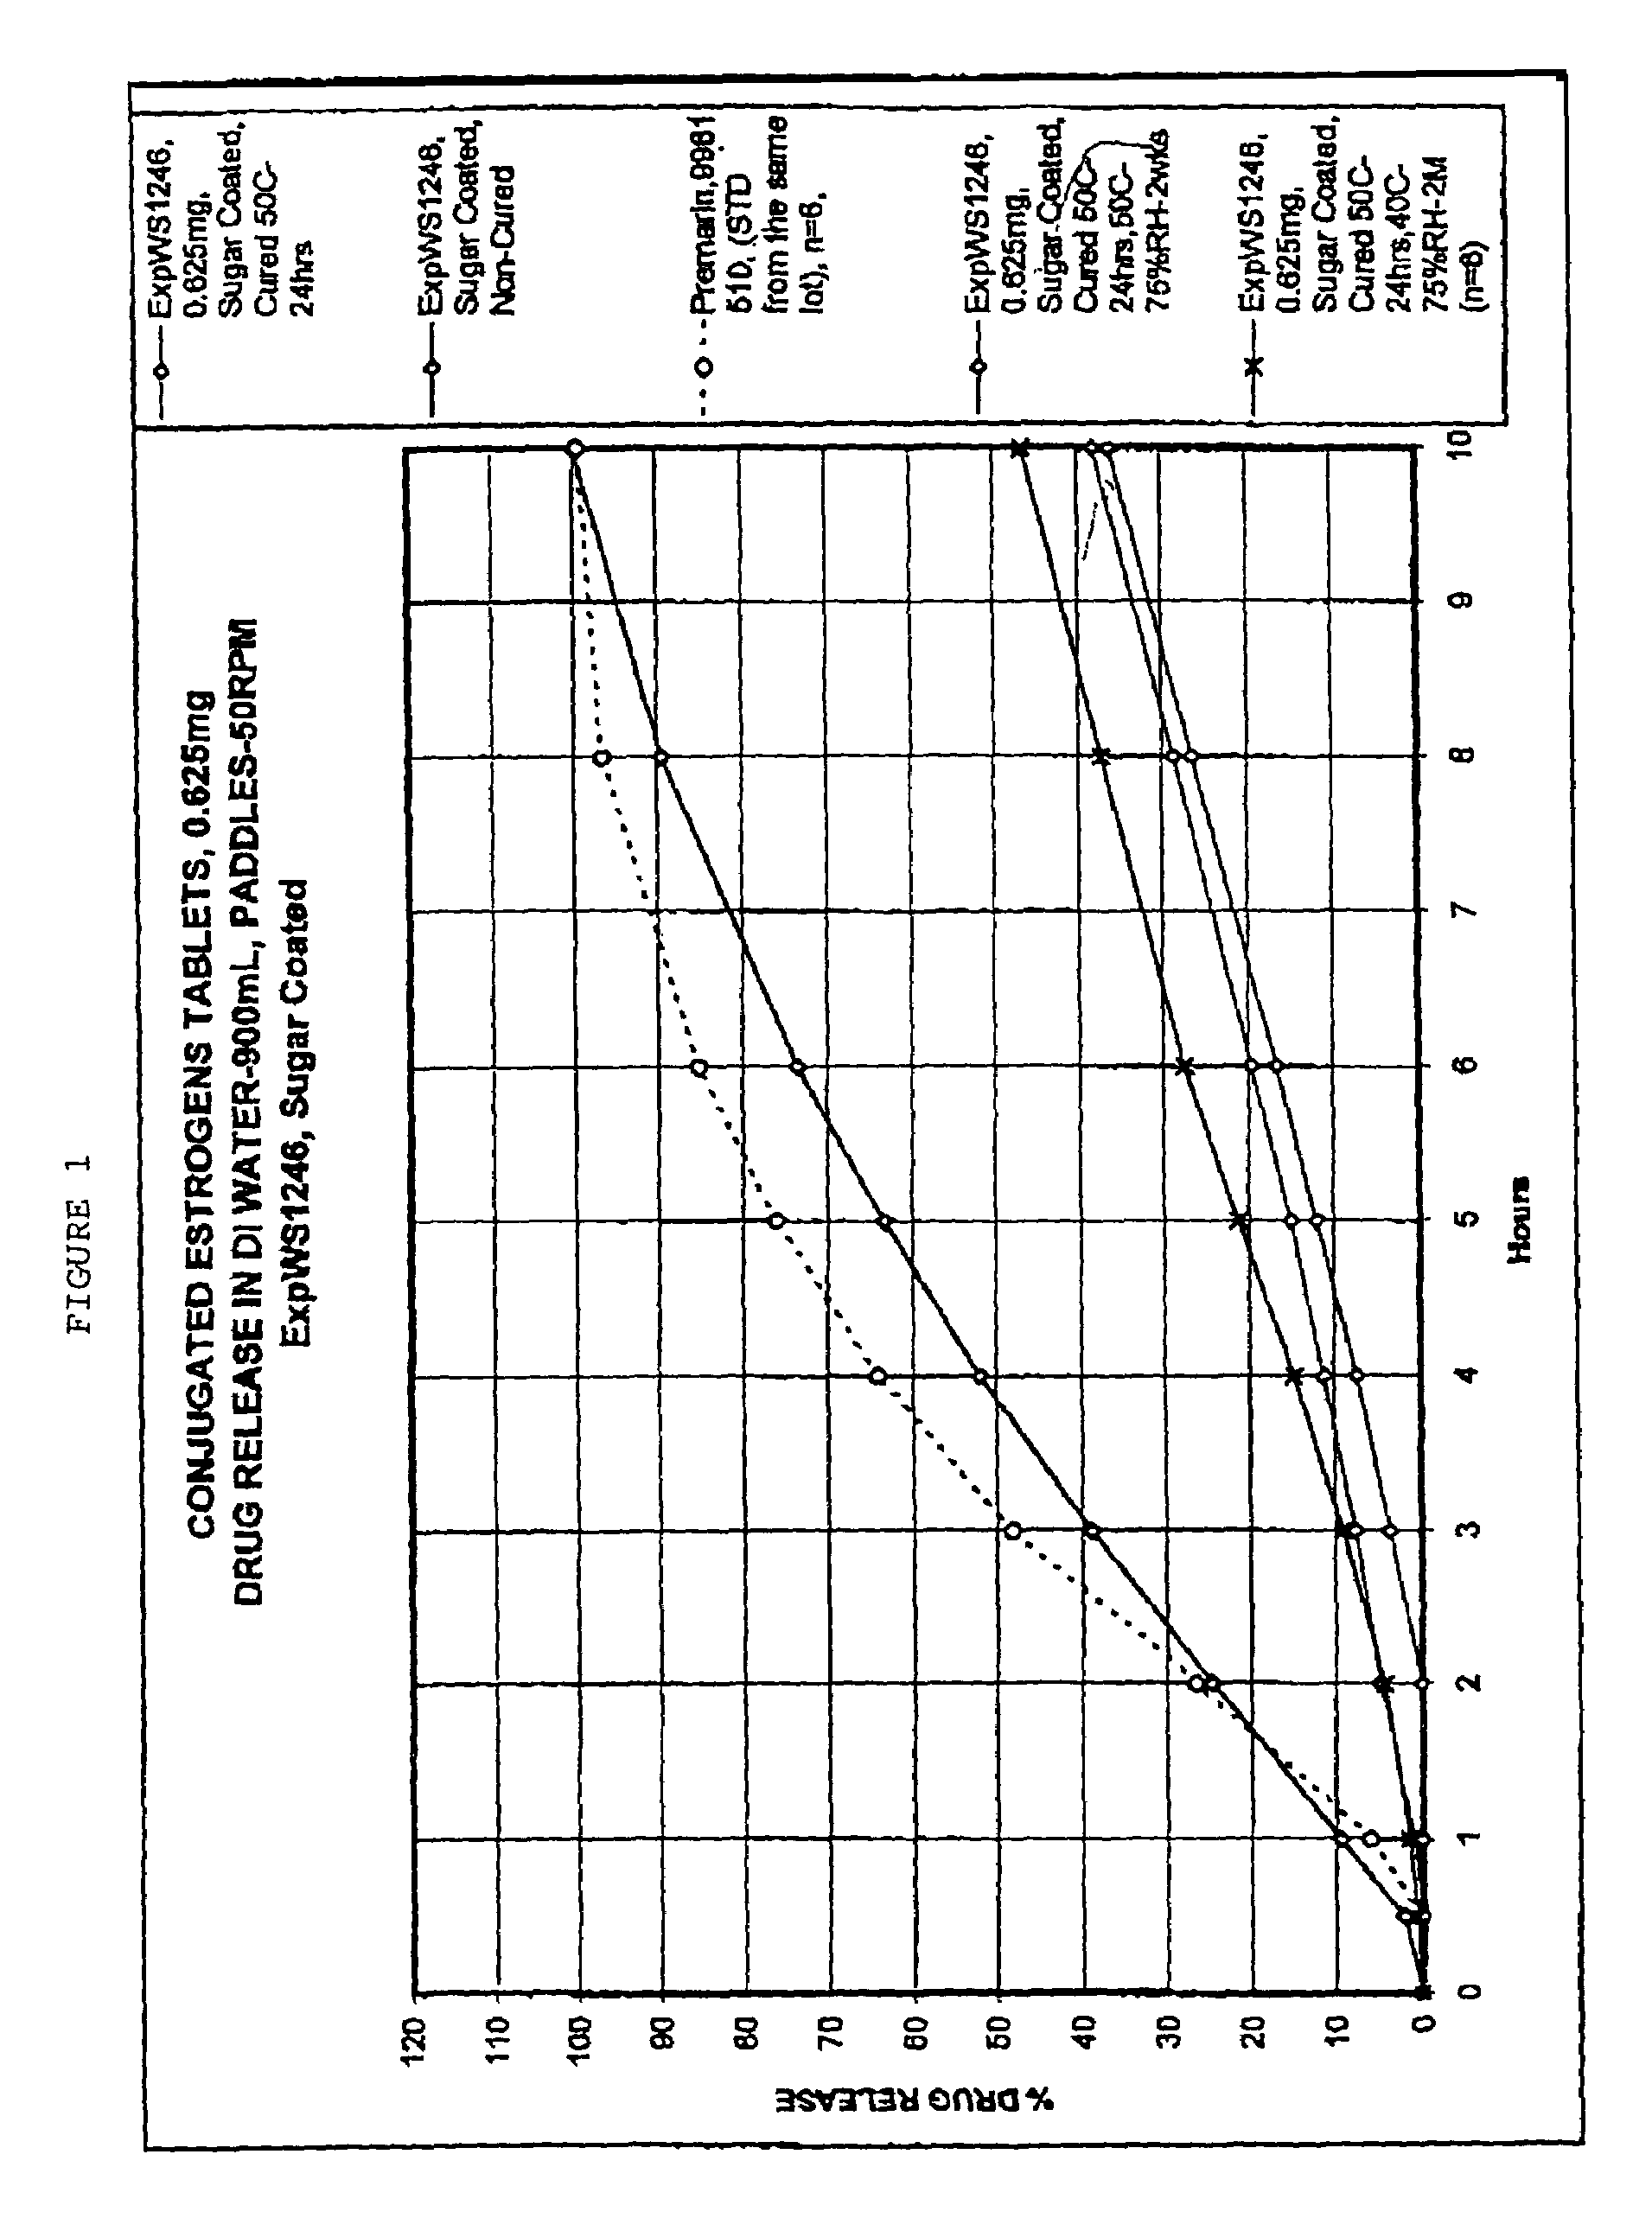 Compositions for conjugated estrogens and associated methods